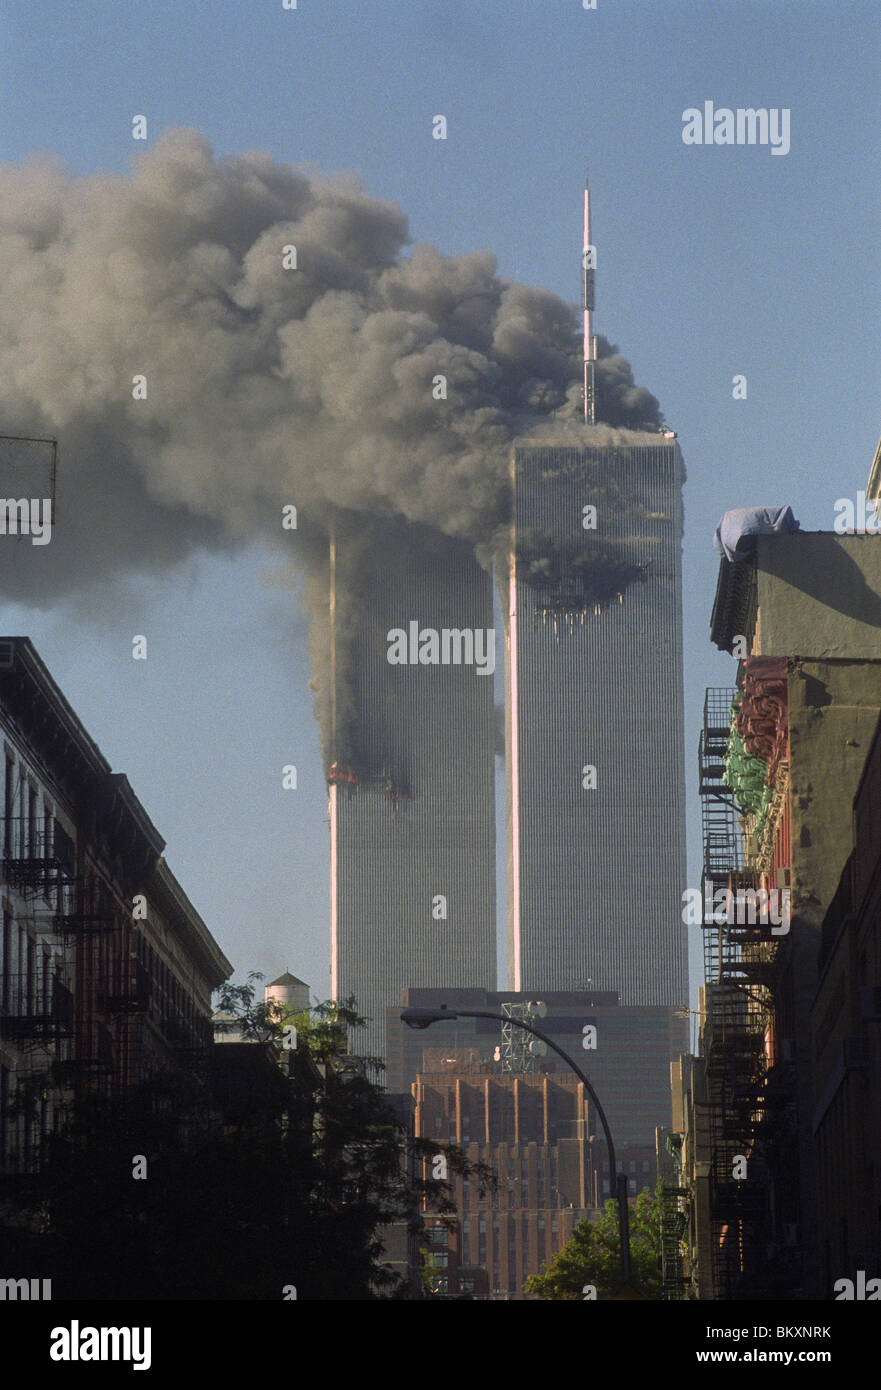 Twin towers of the World Trade Center on the morning of September 11 2001 ©Stacy Walsh Rosenstock/Alamy Stock Photo